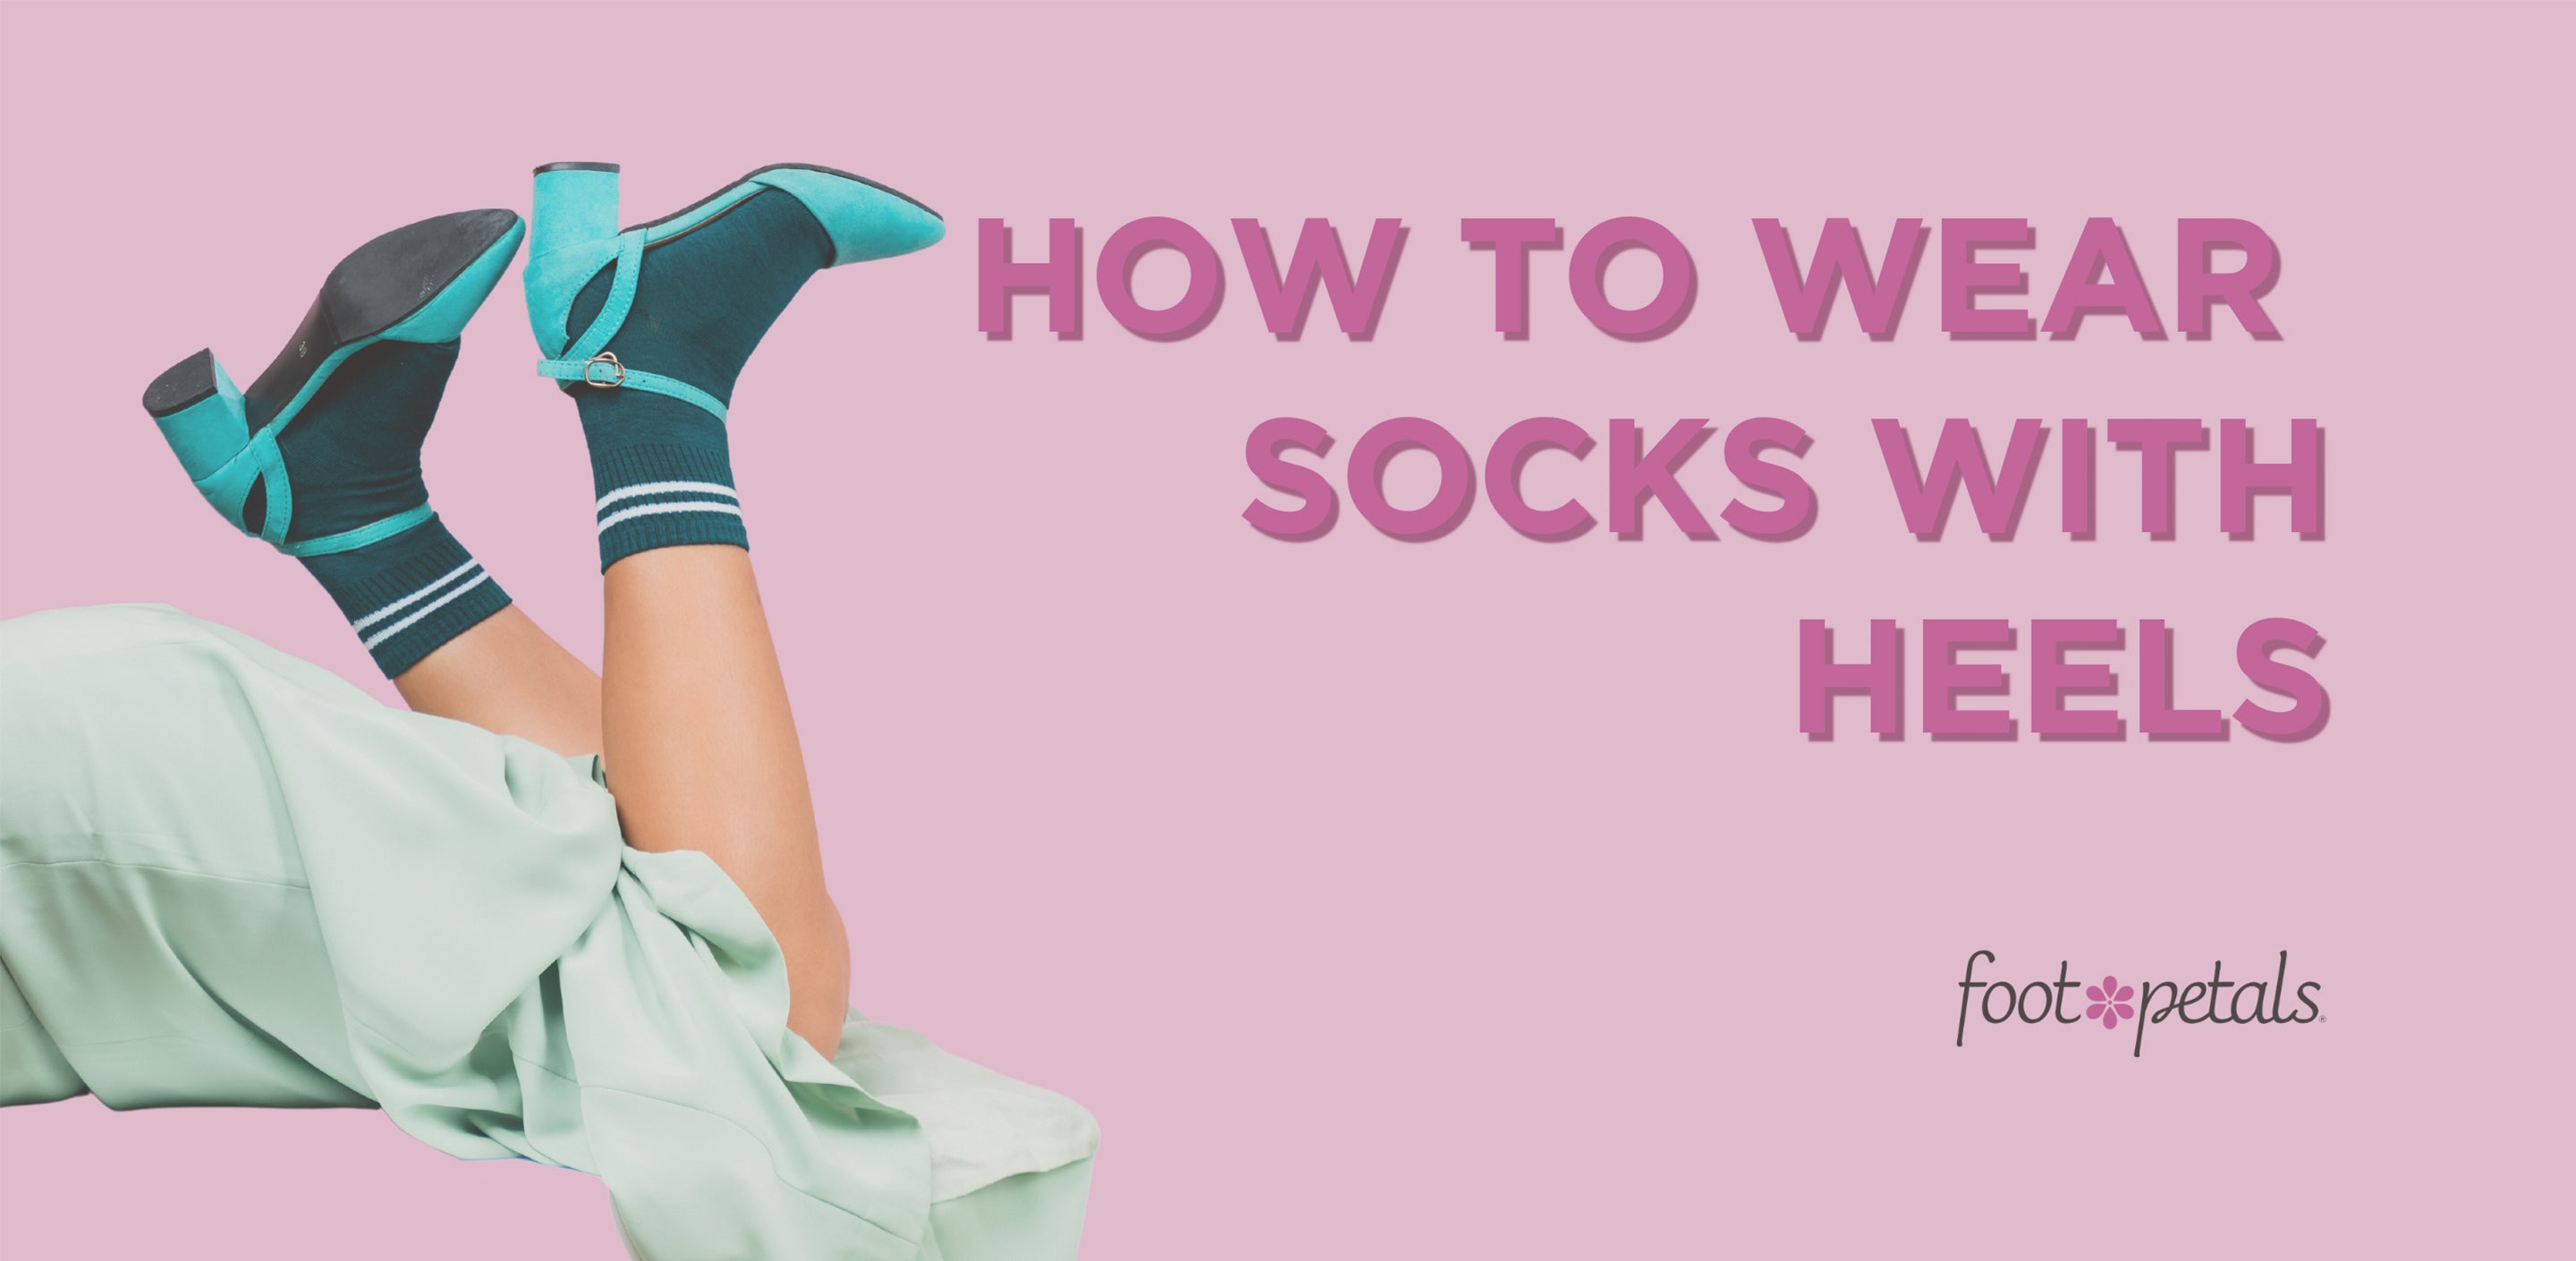 How to Wear Socks and Open Toe Shoes